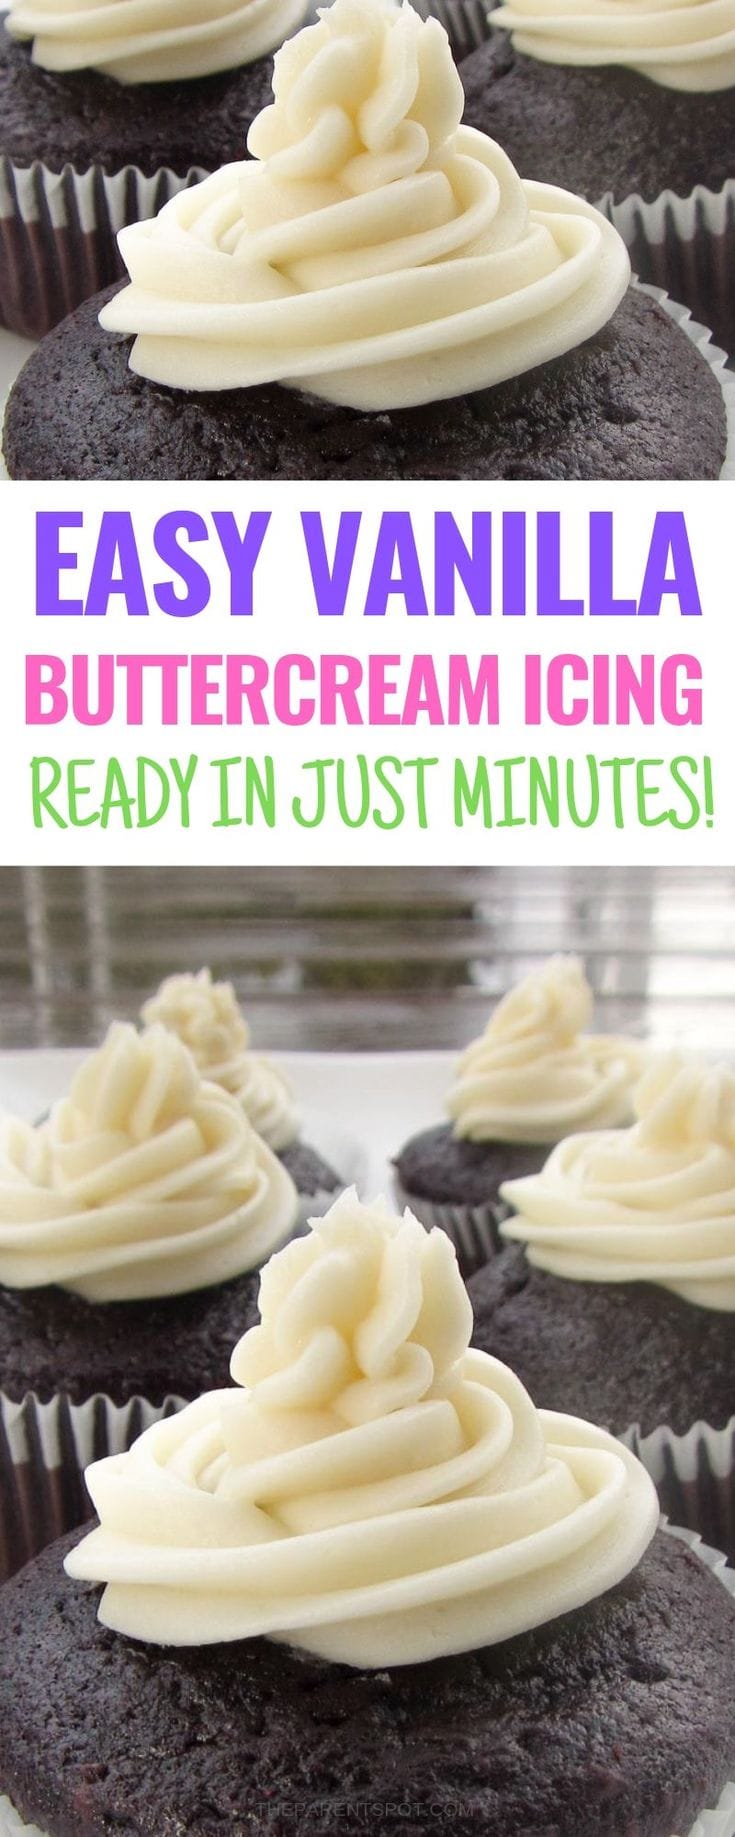 easy vanilla old fashioned buttercream frosting recipe on a chocolate cupcake